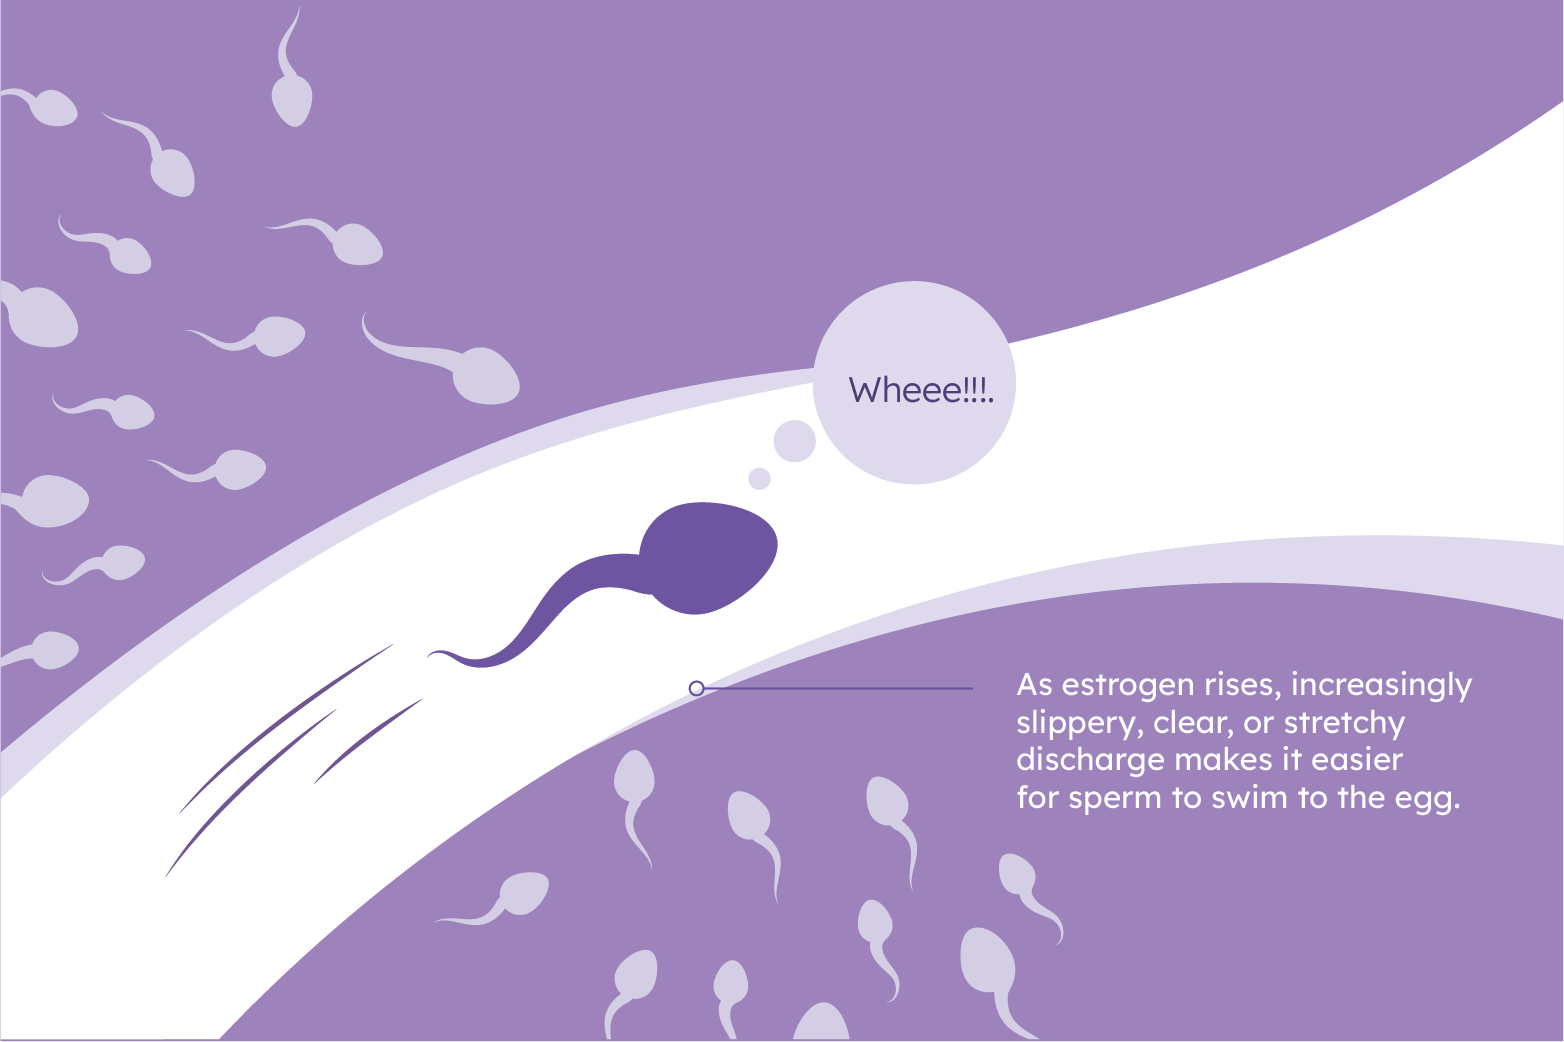 Watery sperm / Watery semen – Why is my sperm watery and clear